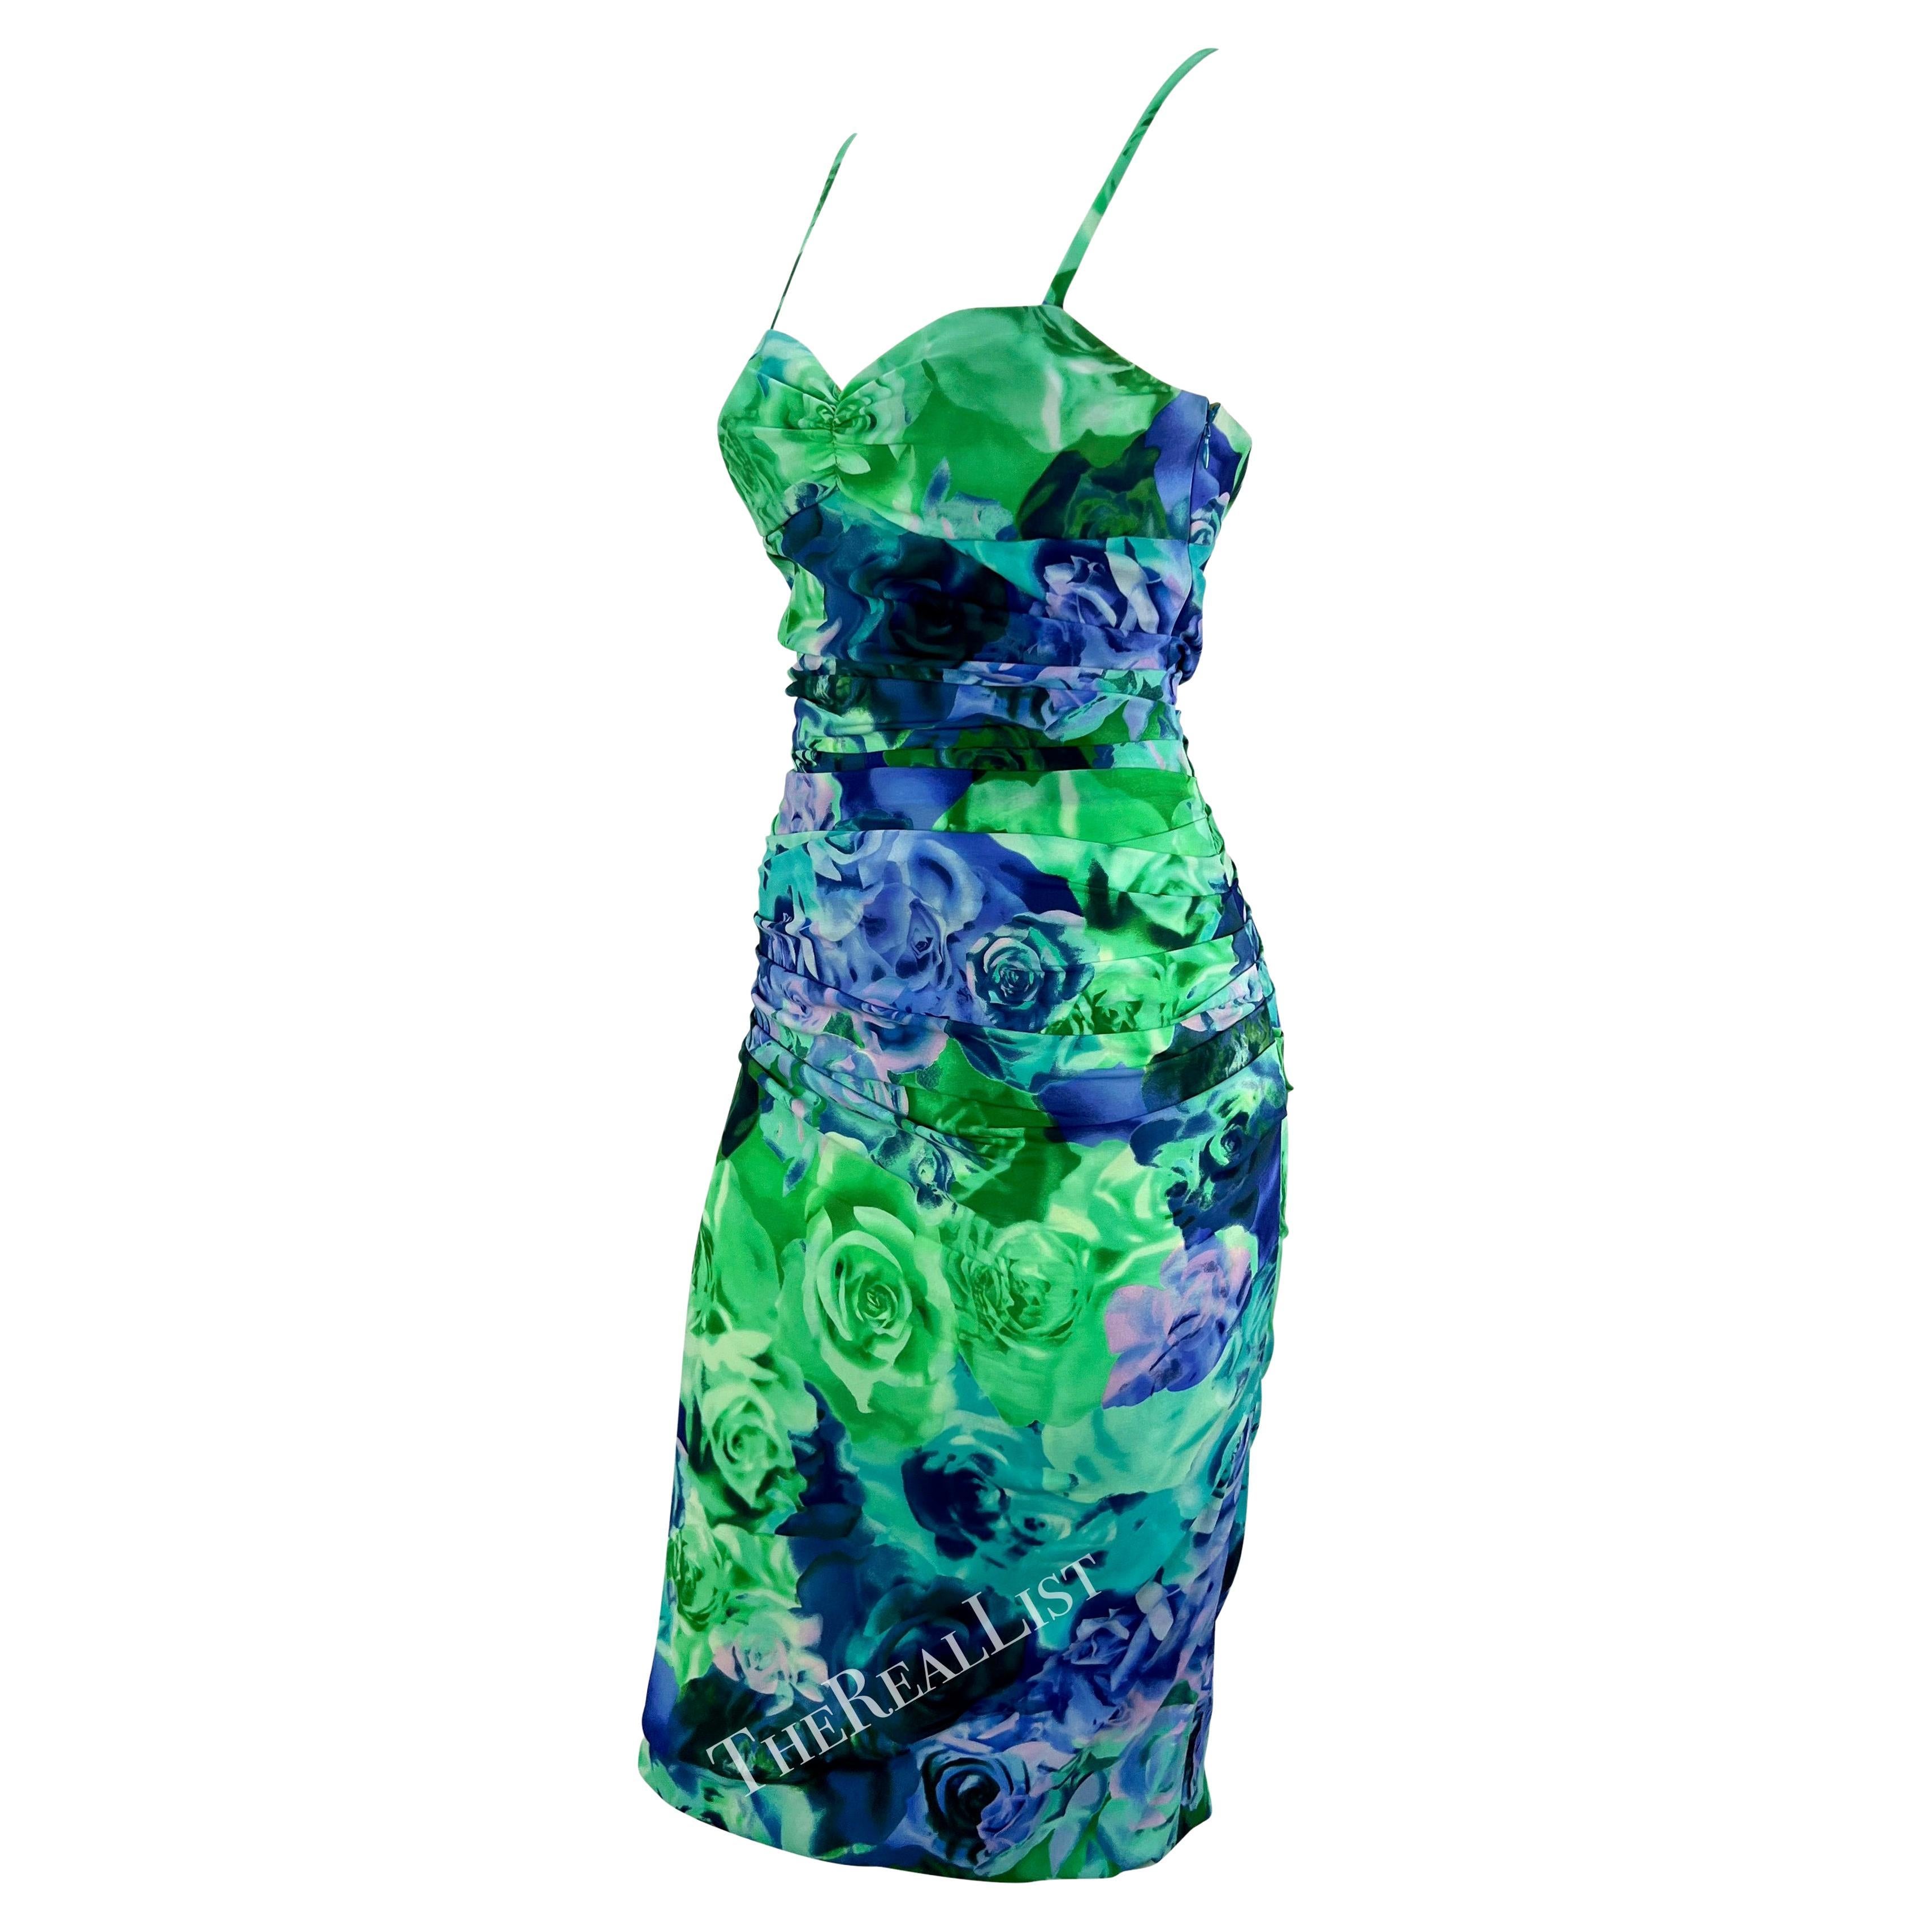 Presenting a gorgeous green rose print Versace mini dress, designed by Donatella Versace. From the Spring/Summer 2005 collection, this sexy mini dress features a sweetheart neckline, spaghetti straps, and ruching throughout. The sexy exposed back